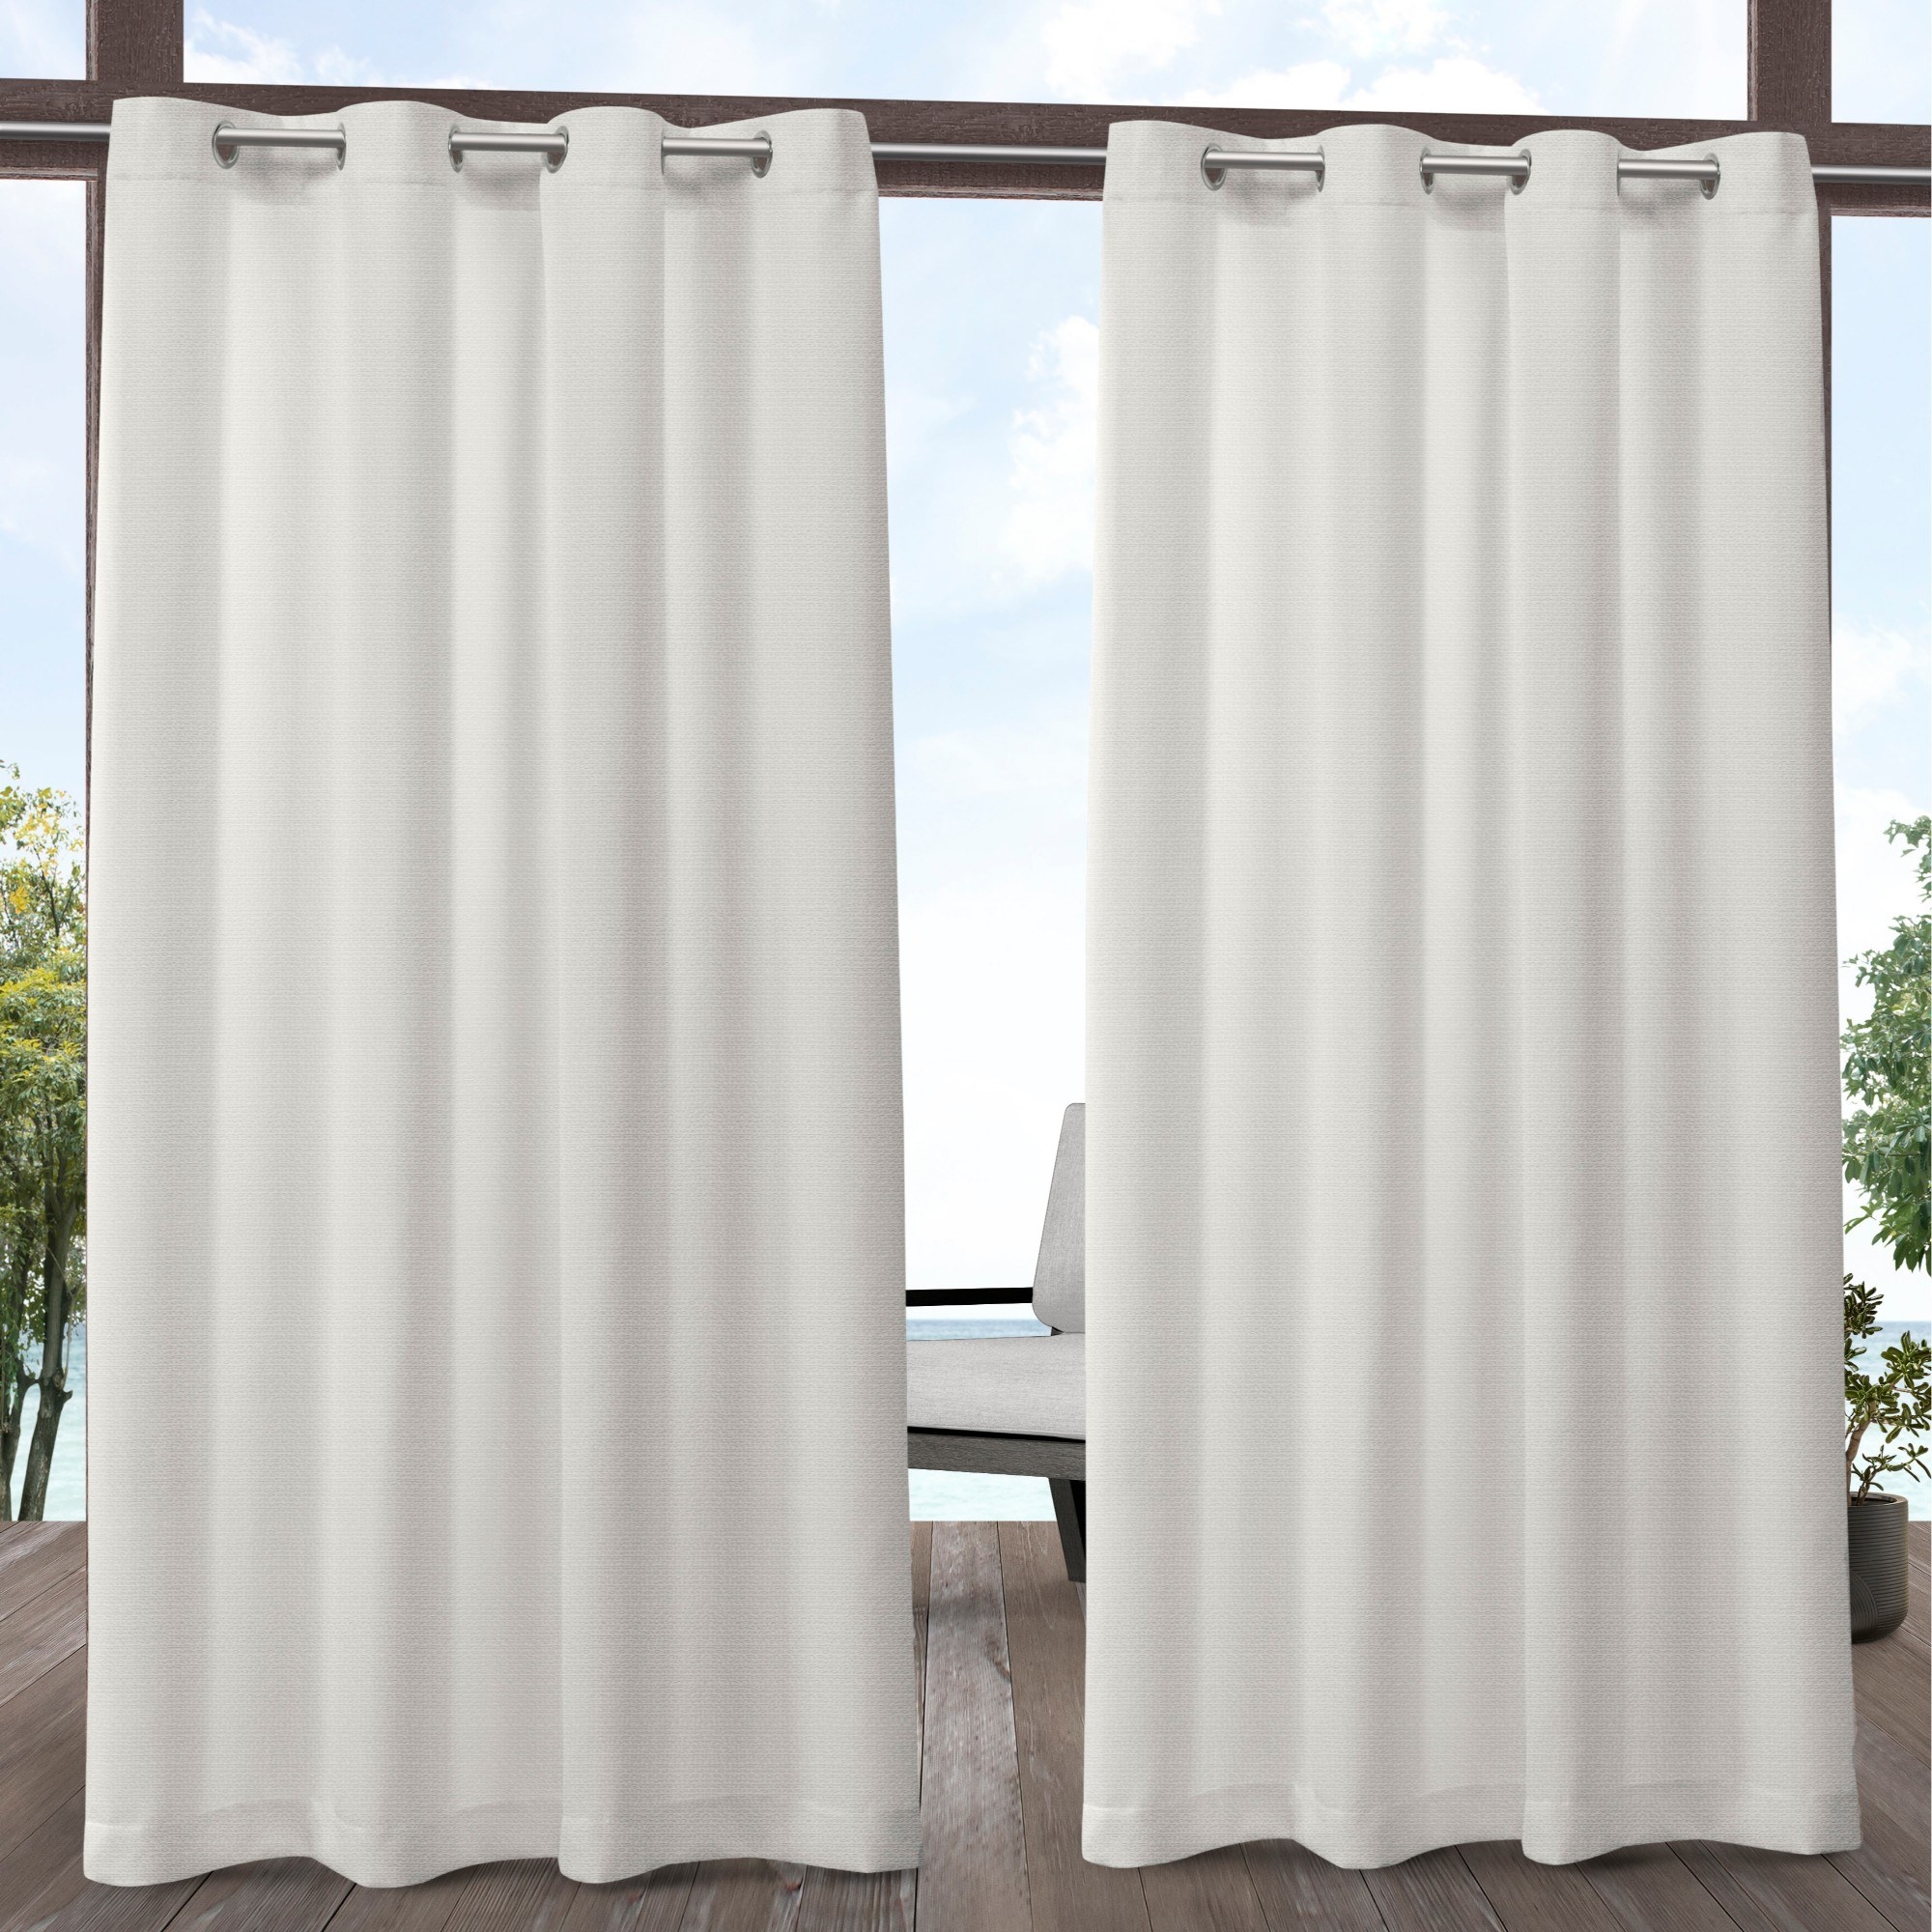 the white curtains